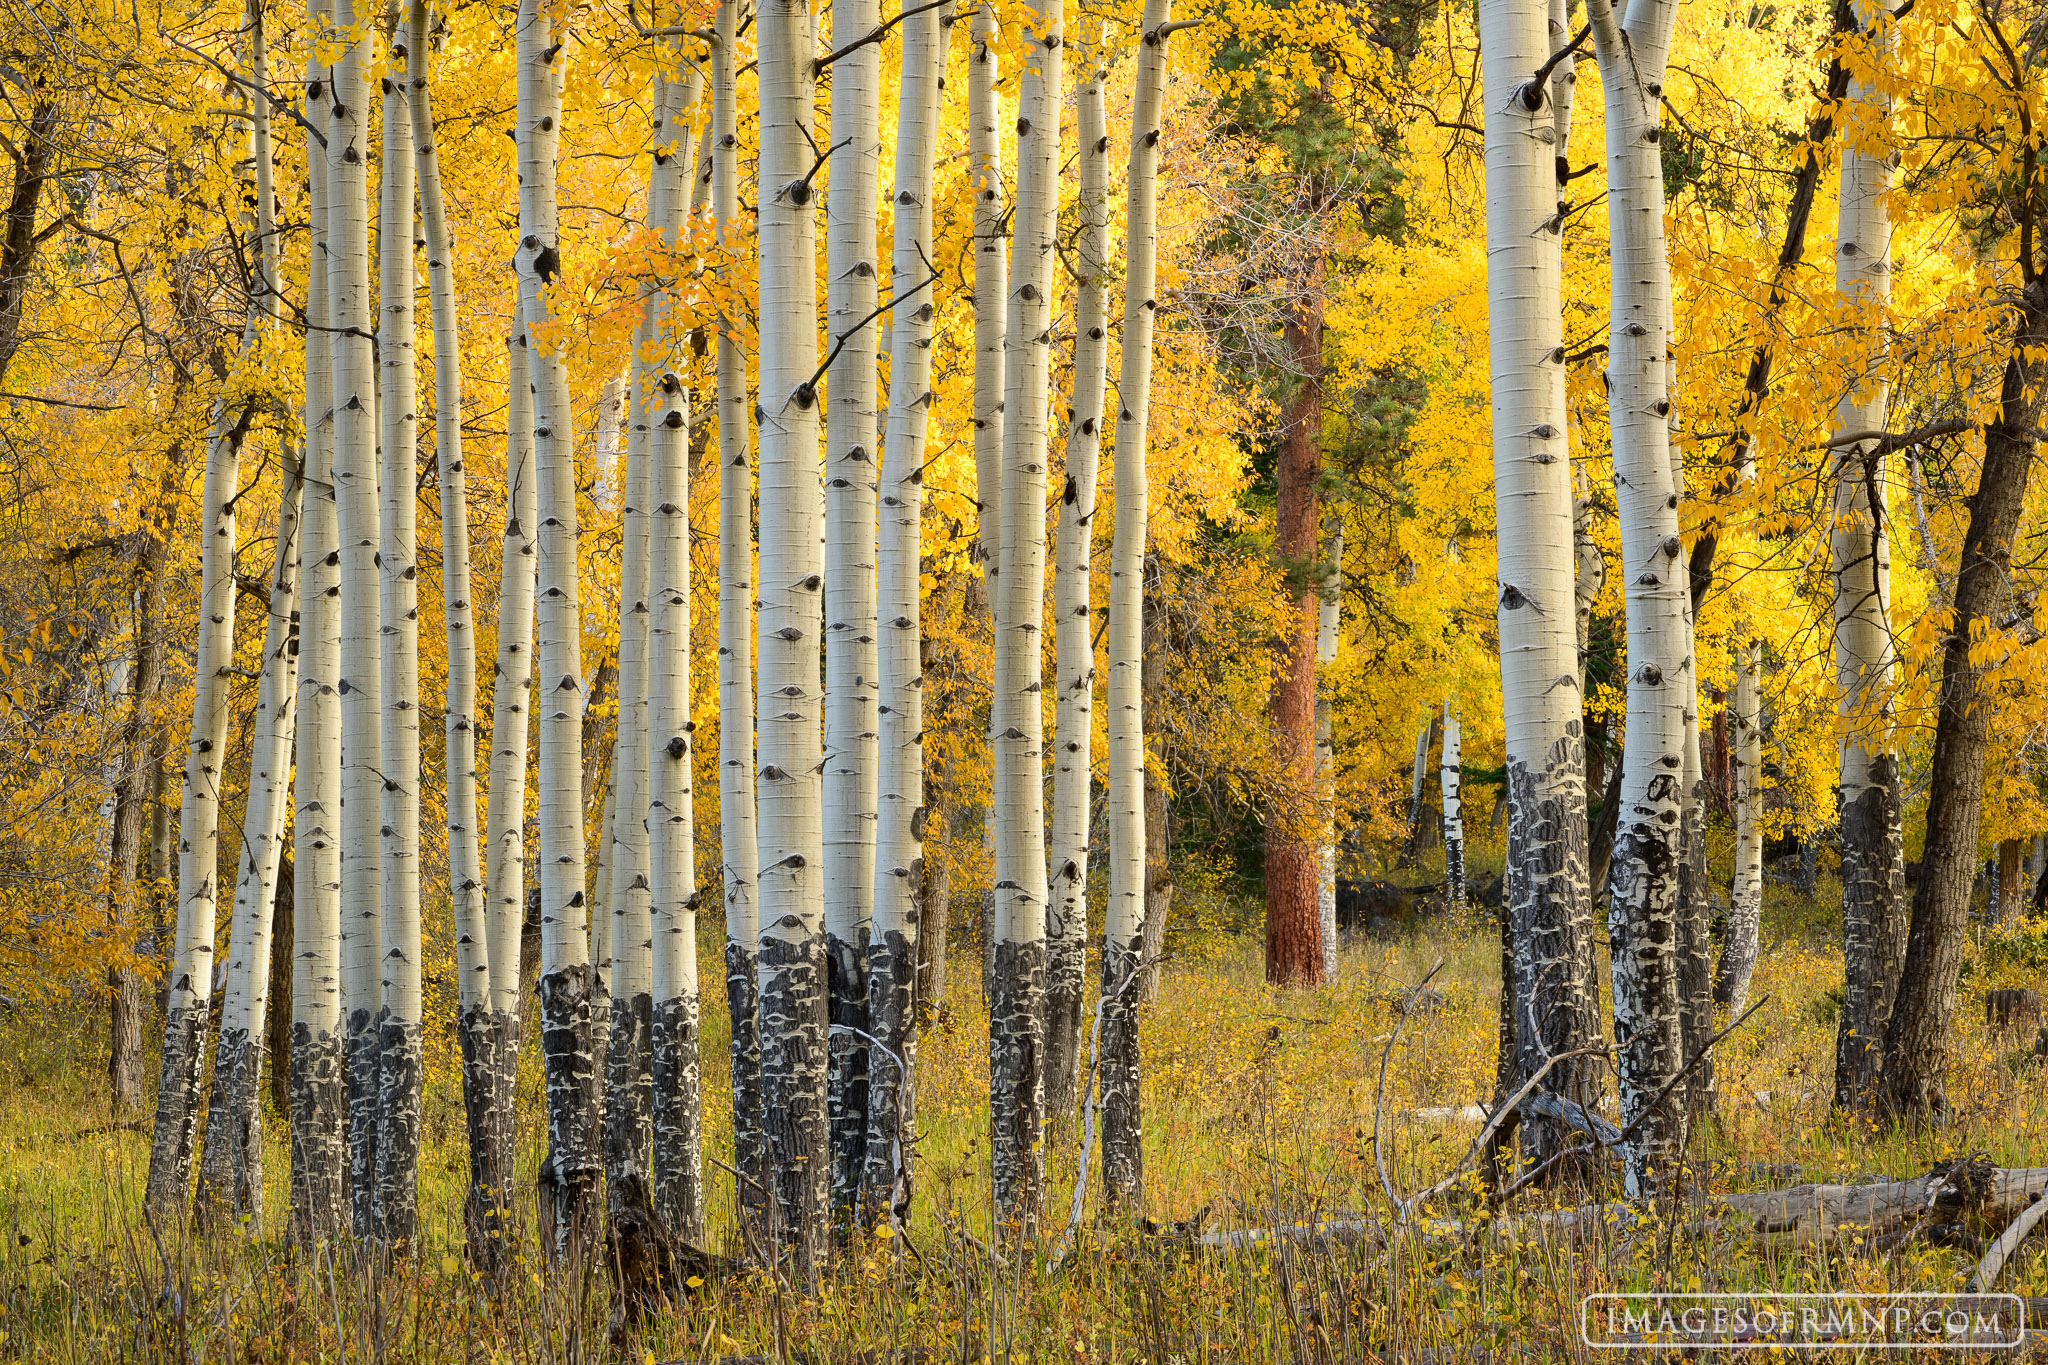 On a beautiful October morning I wandered through an aspen grove. As I came upon this scene, I was instantly captivated by the...